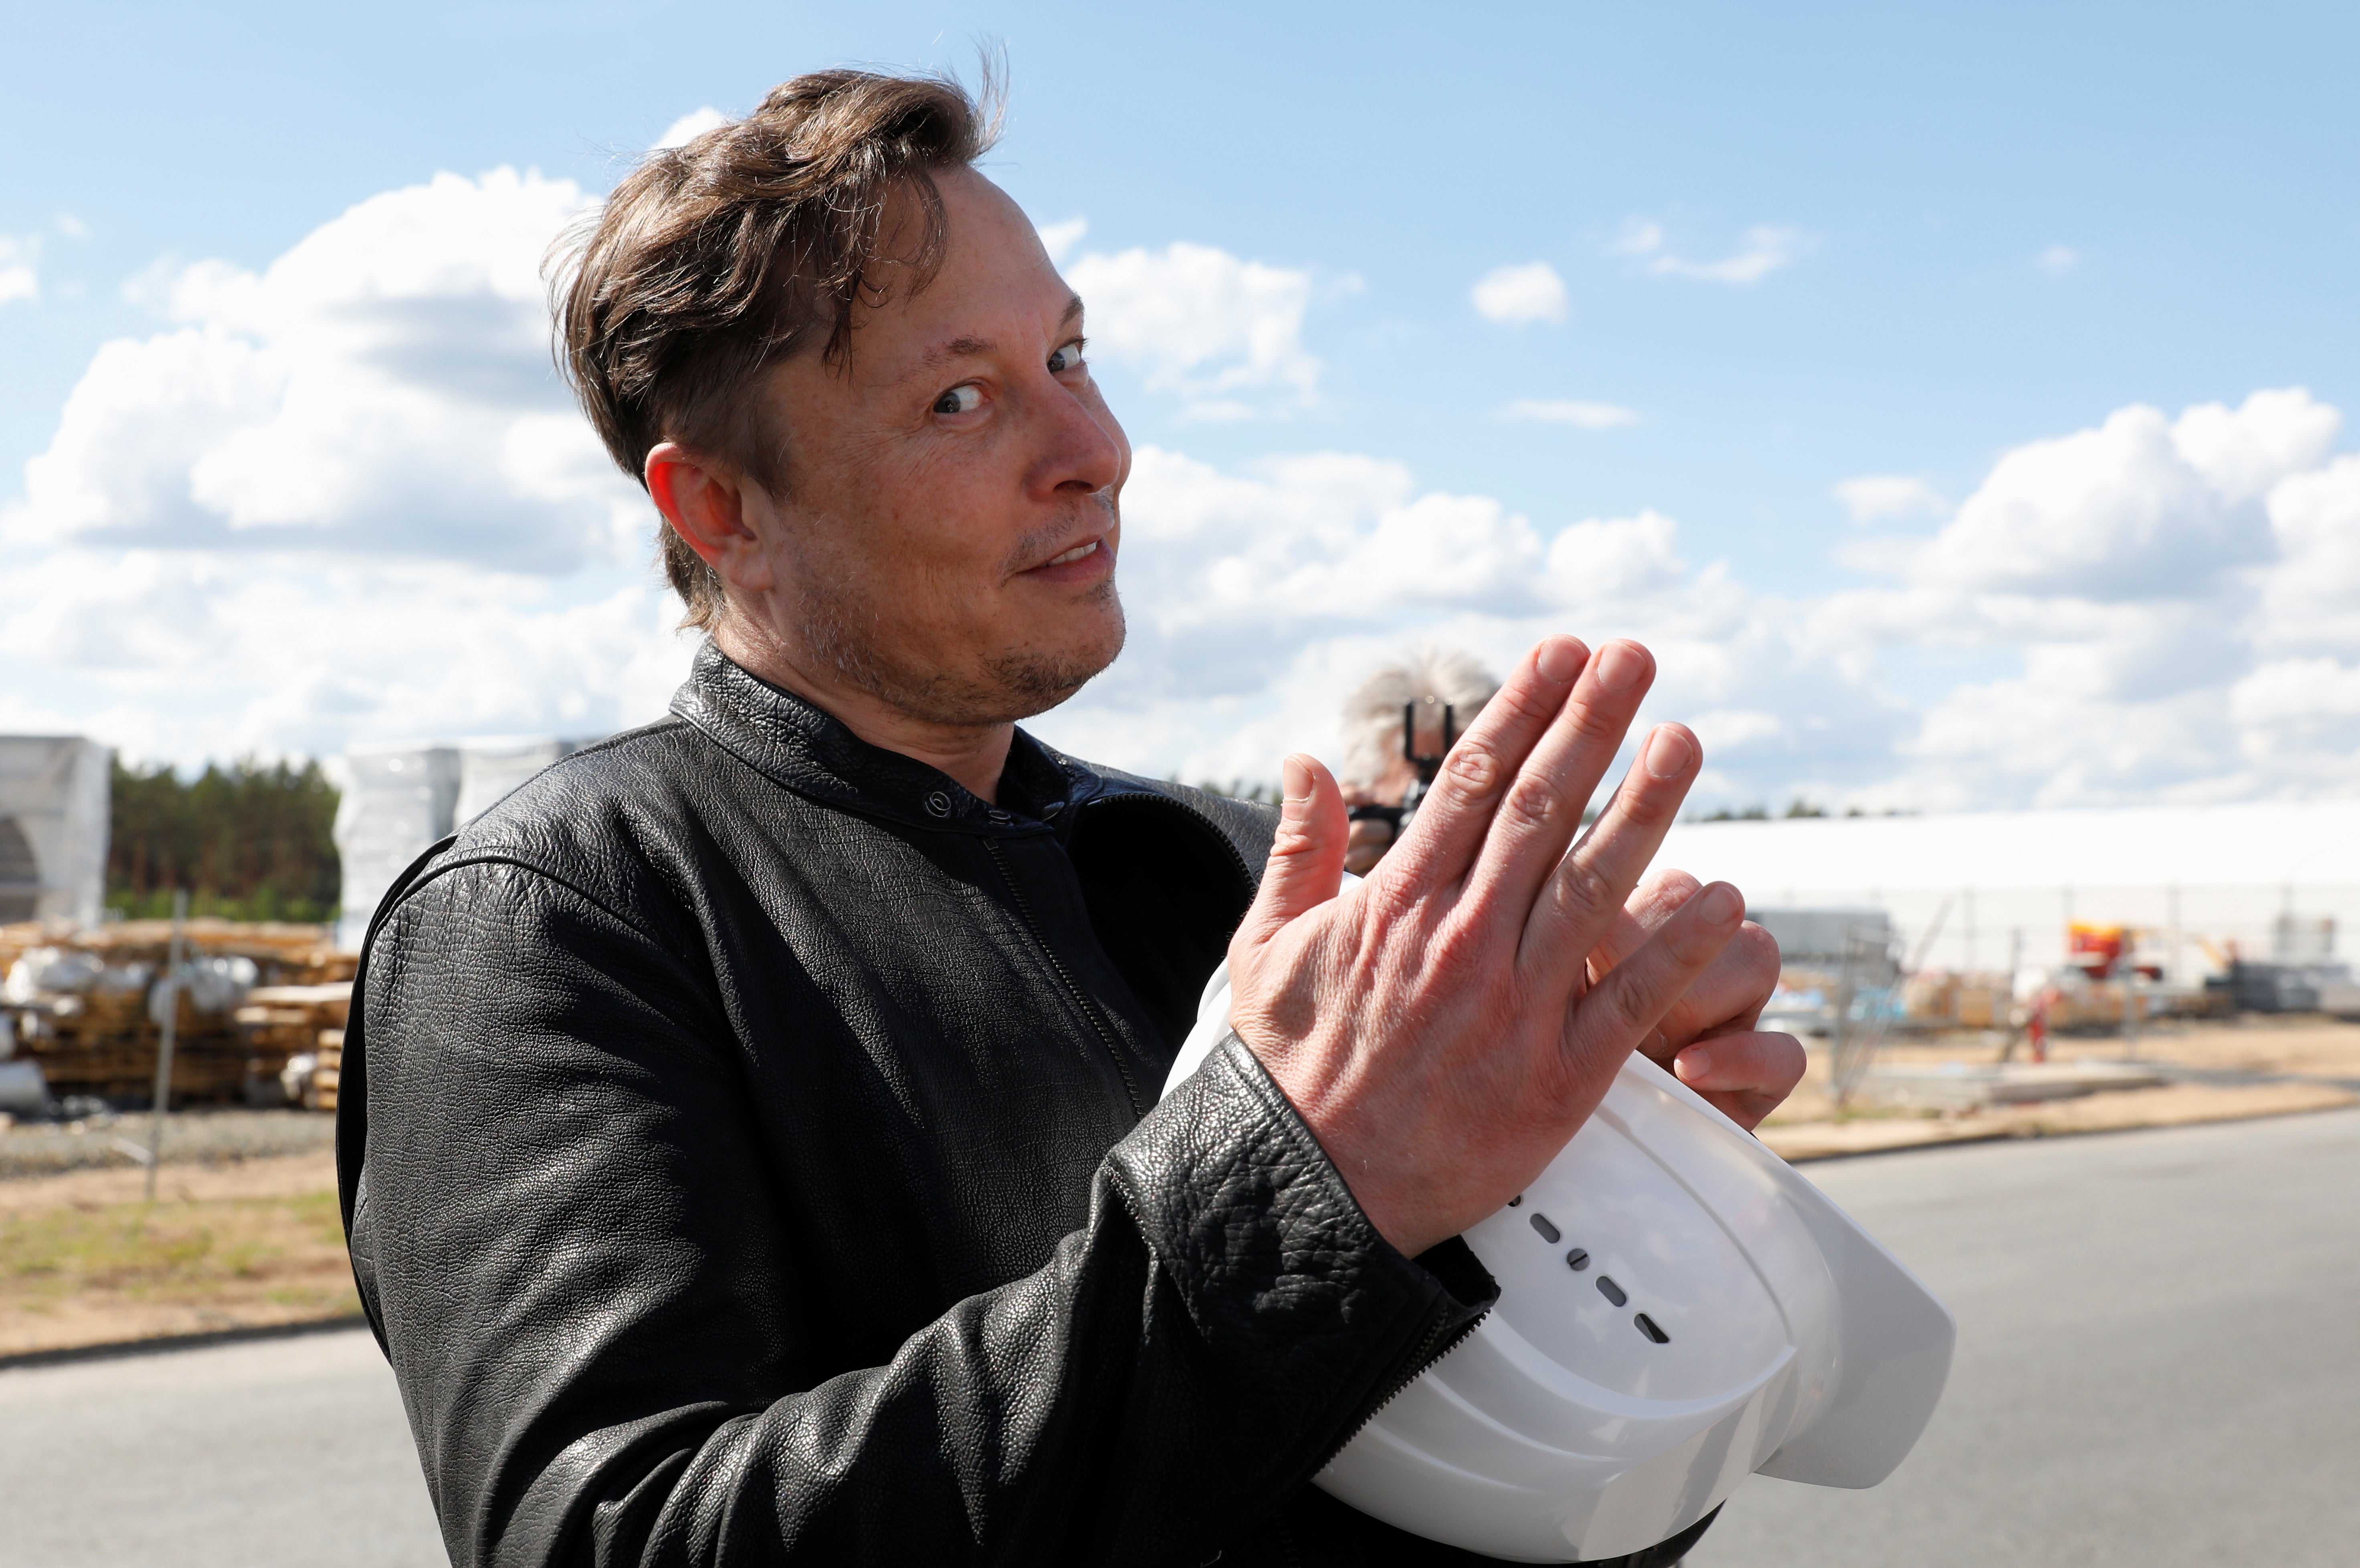 SpaceX founder and Tesla CEO Elon Musk visits the construction site of Tesla's gigafactory in Gruenheide, near Berlin